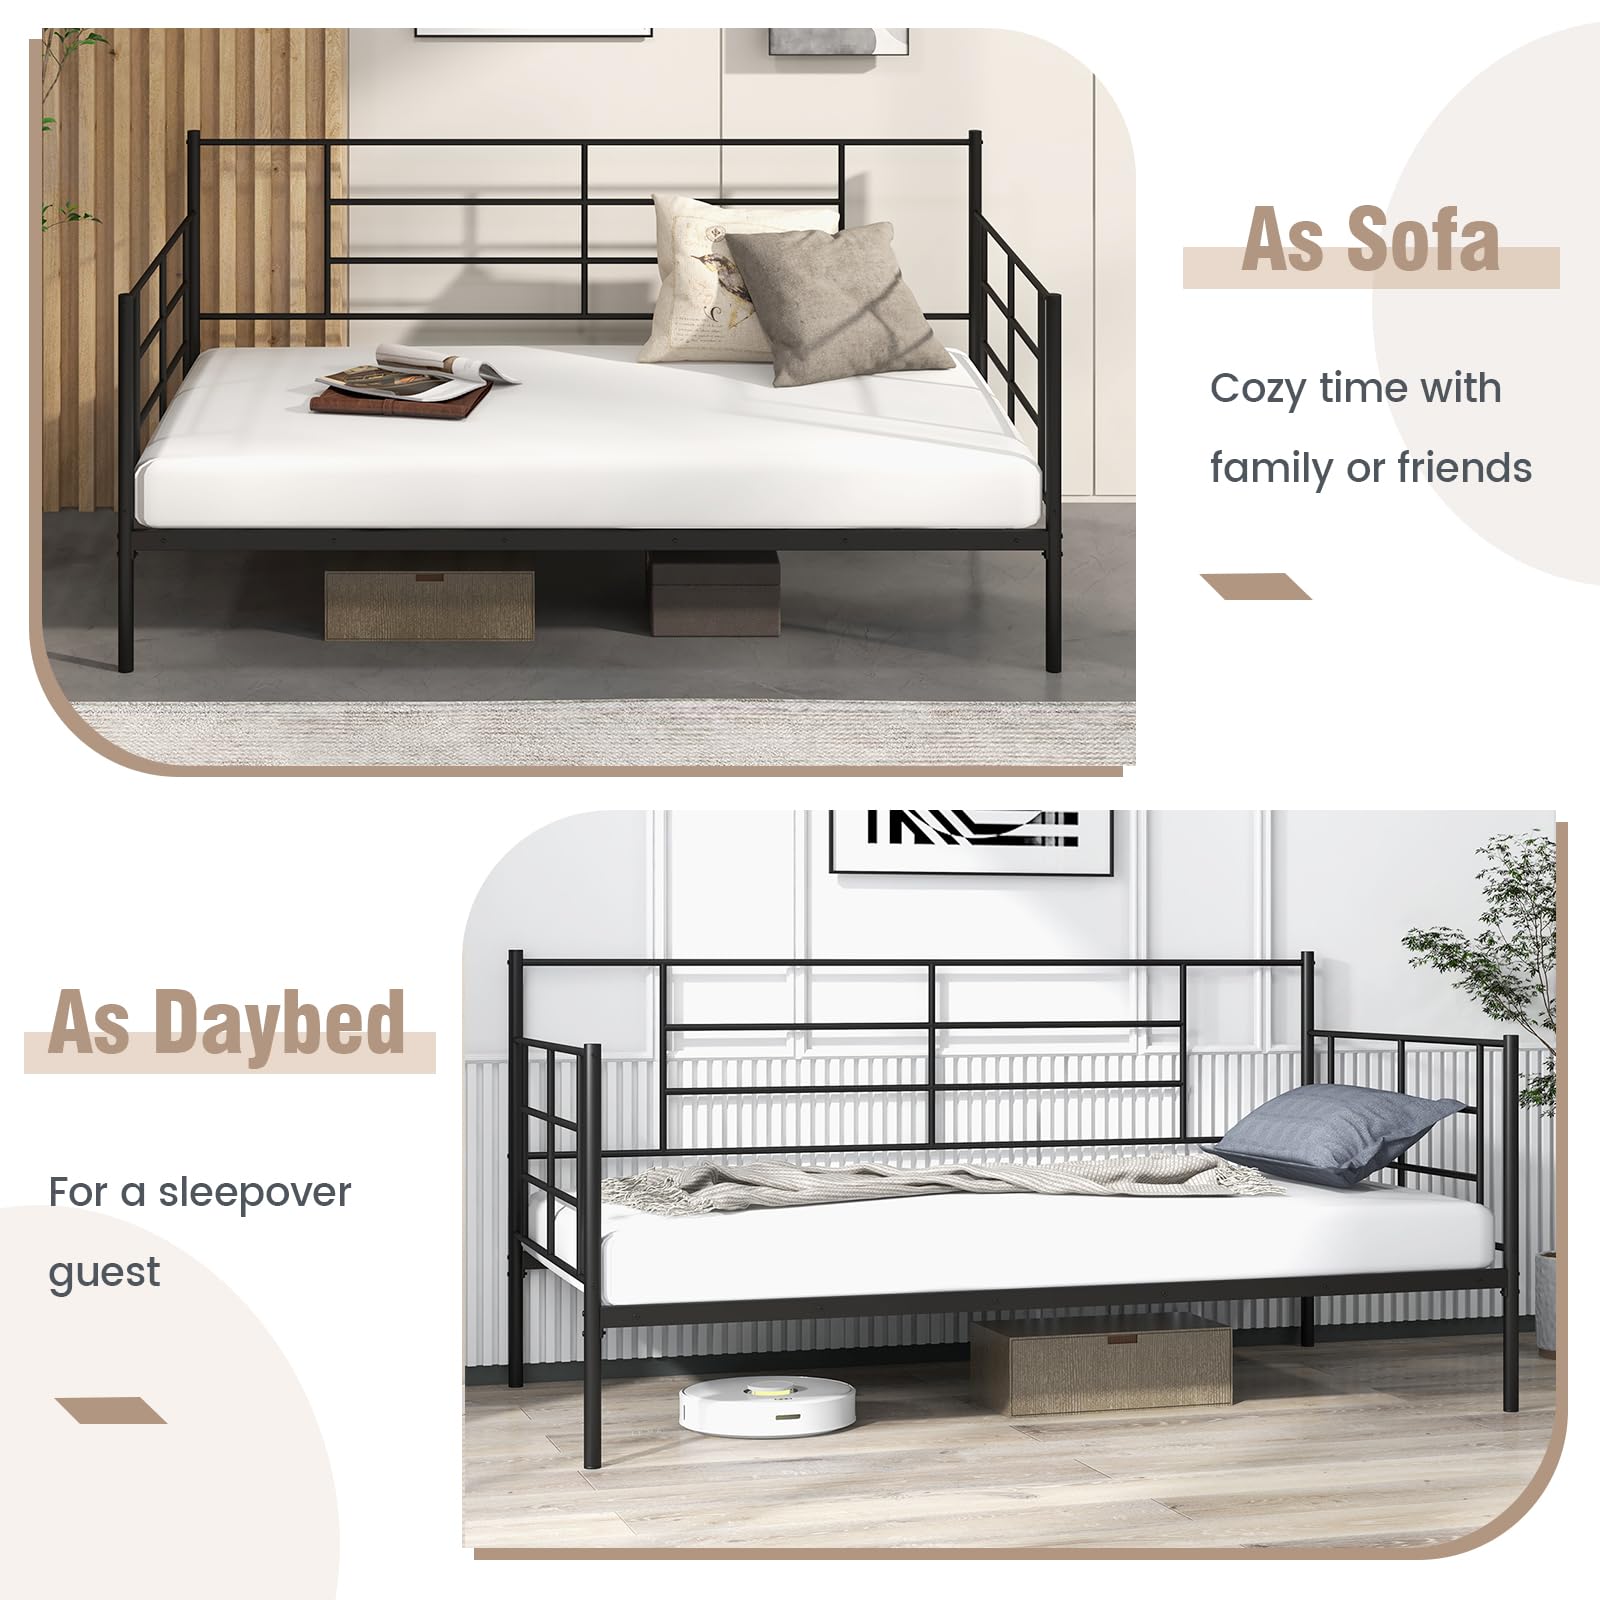 Multifunctional Platform Bed Mattress Foundation with Headboard for Living Room